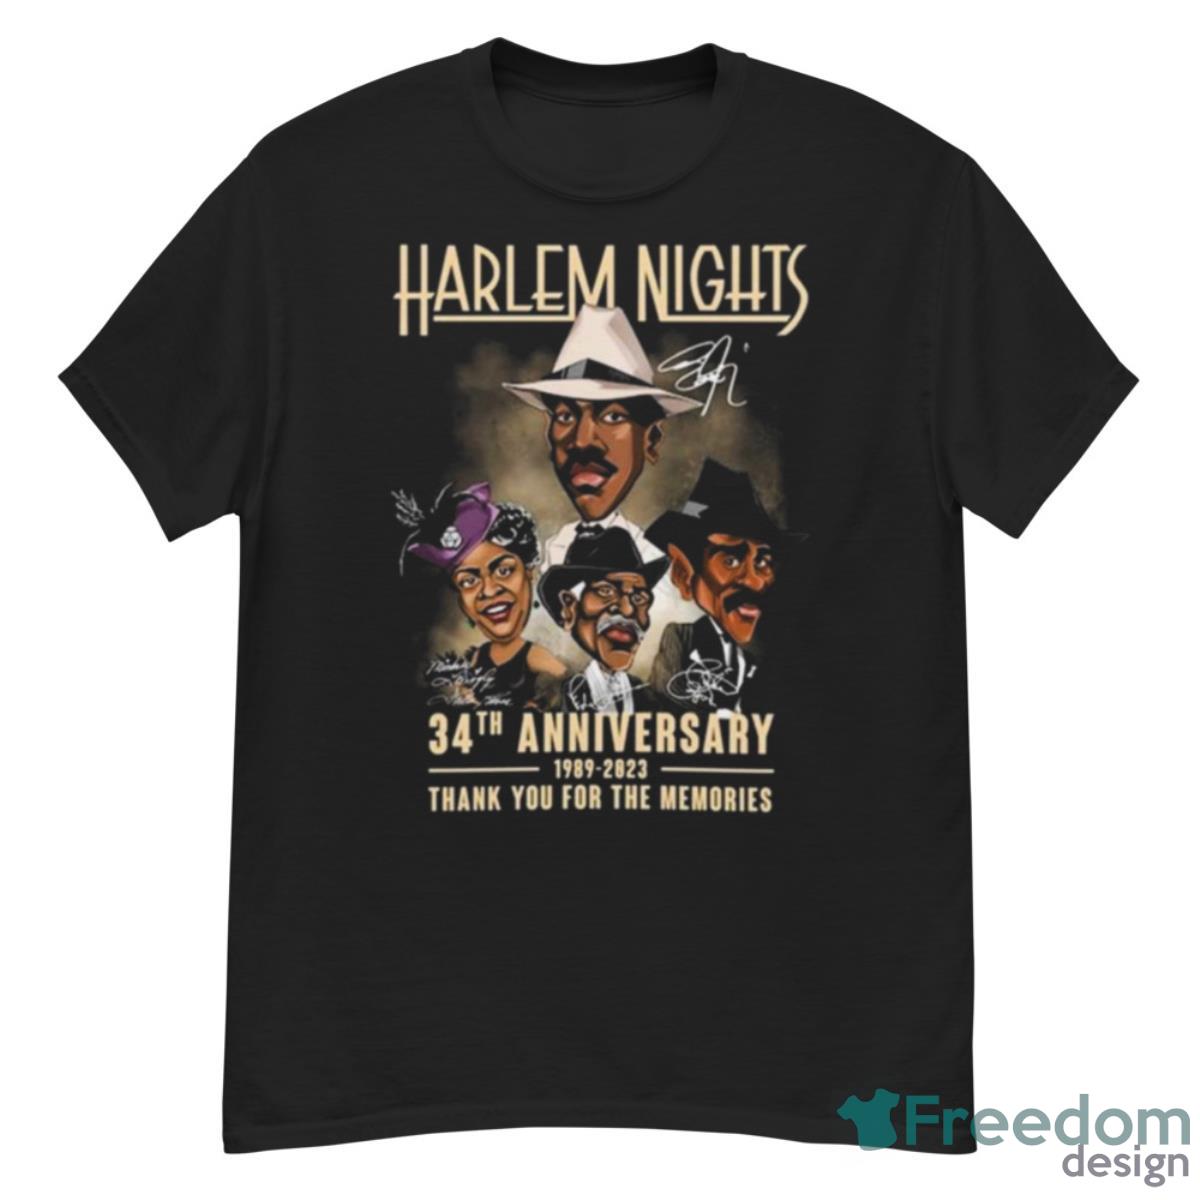 Harlem Nights 34th Anniversary 1989 – 2023 Thank You For The Memories Signatures Shirt - G500 Men’s Classic T-Shirt